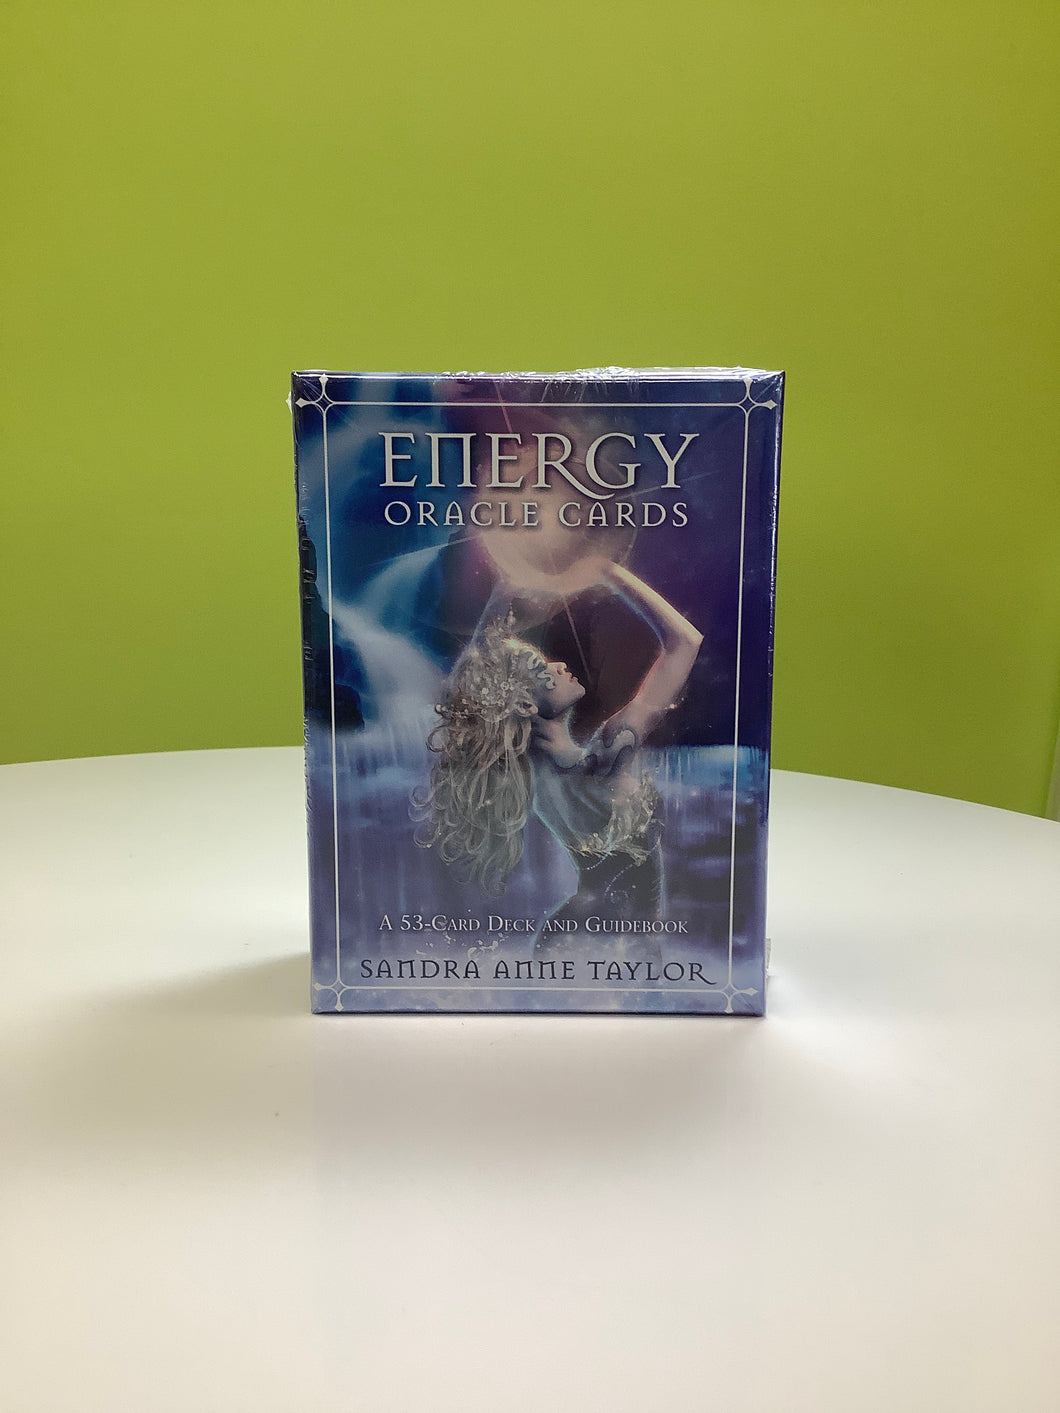 Energy Oracle Cards Deck and Guidebook